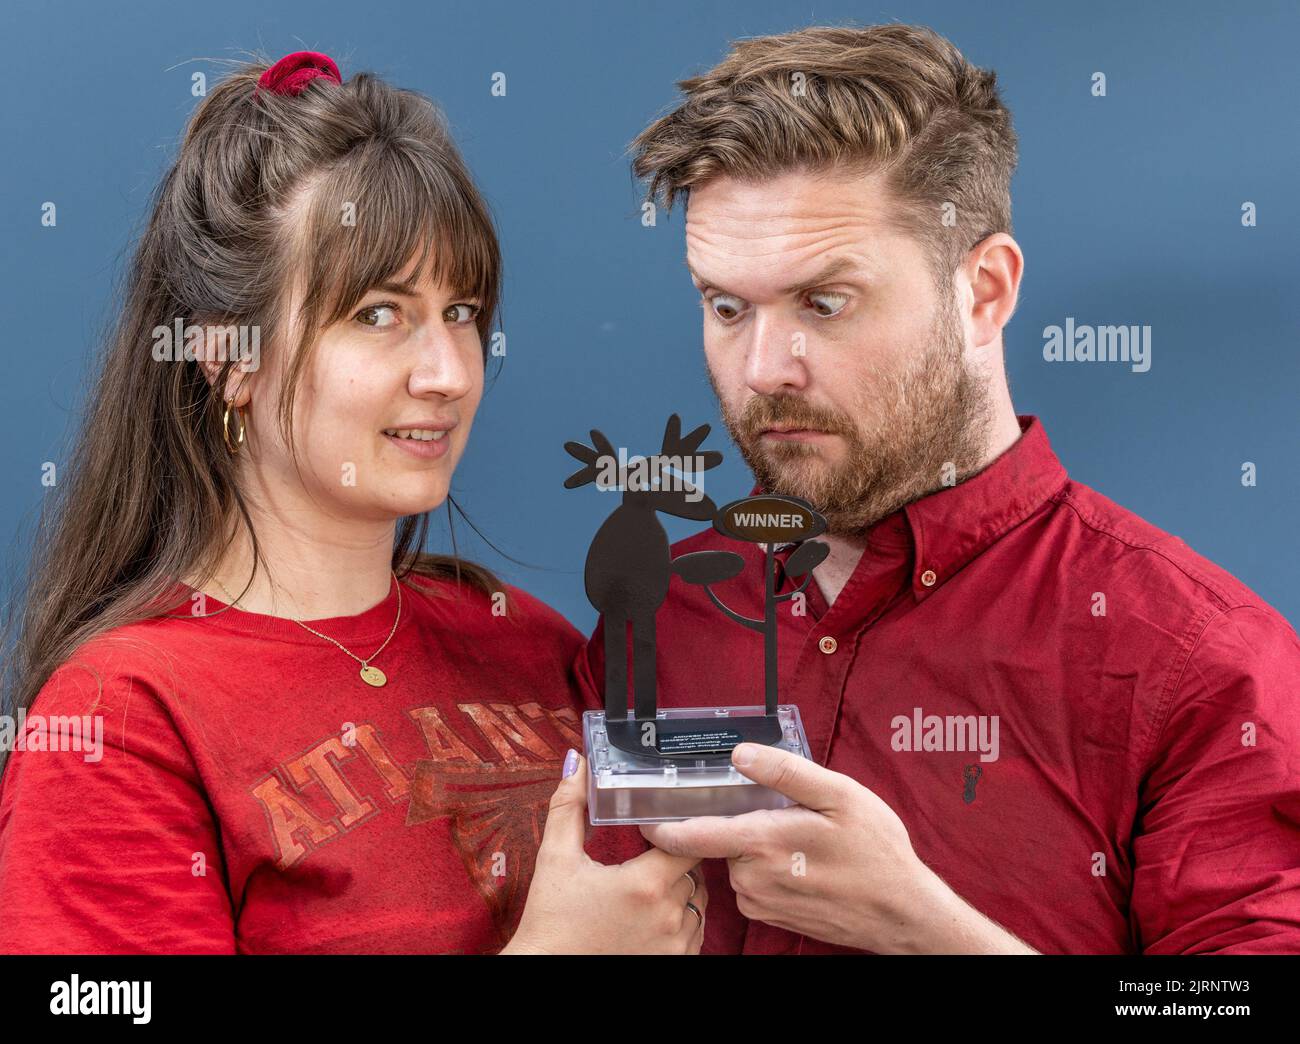 Edinburgh, United Kingdom. 21 August, 2022 Pictured: Grubby Little Mitts winners of the Amused Moose Comedy Awards Top Sketch Show. Photograph taken for Amused Moose Comedy Awards. Credit: Rich Dyson Stock Photo